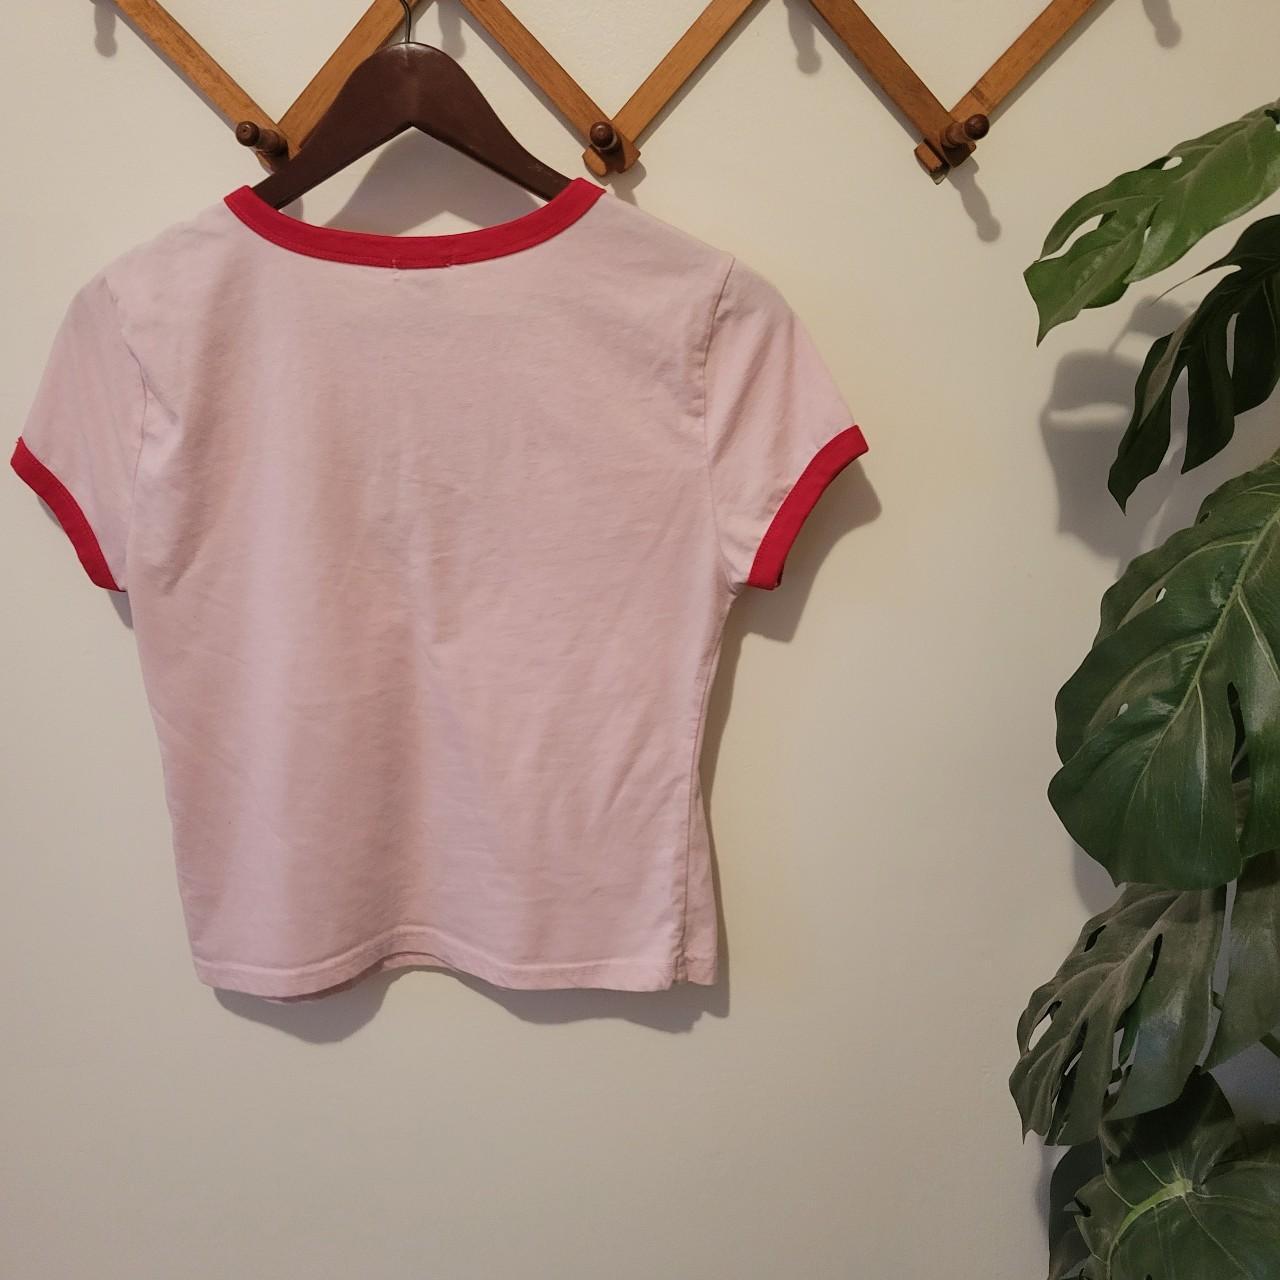 Rue 21 Women's Red and Pink T-shirt (3)